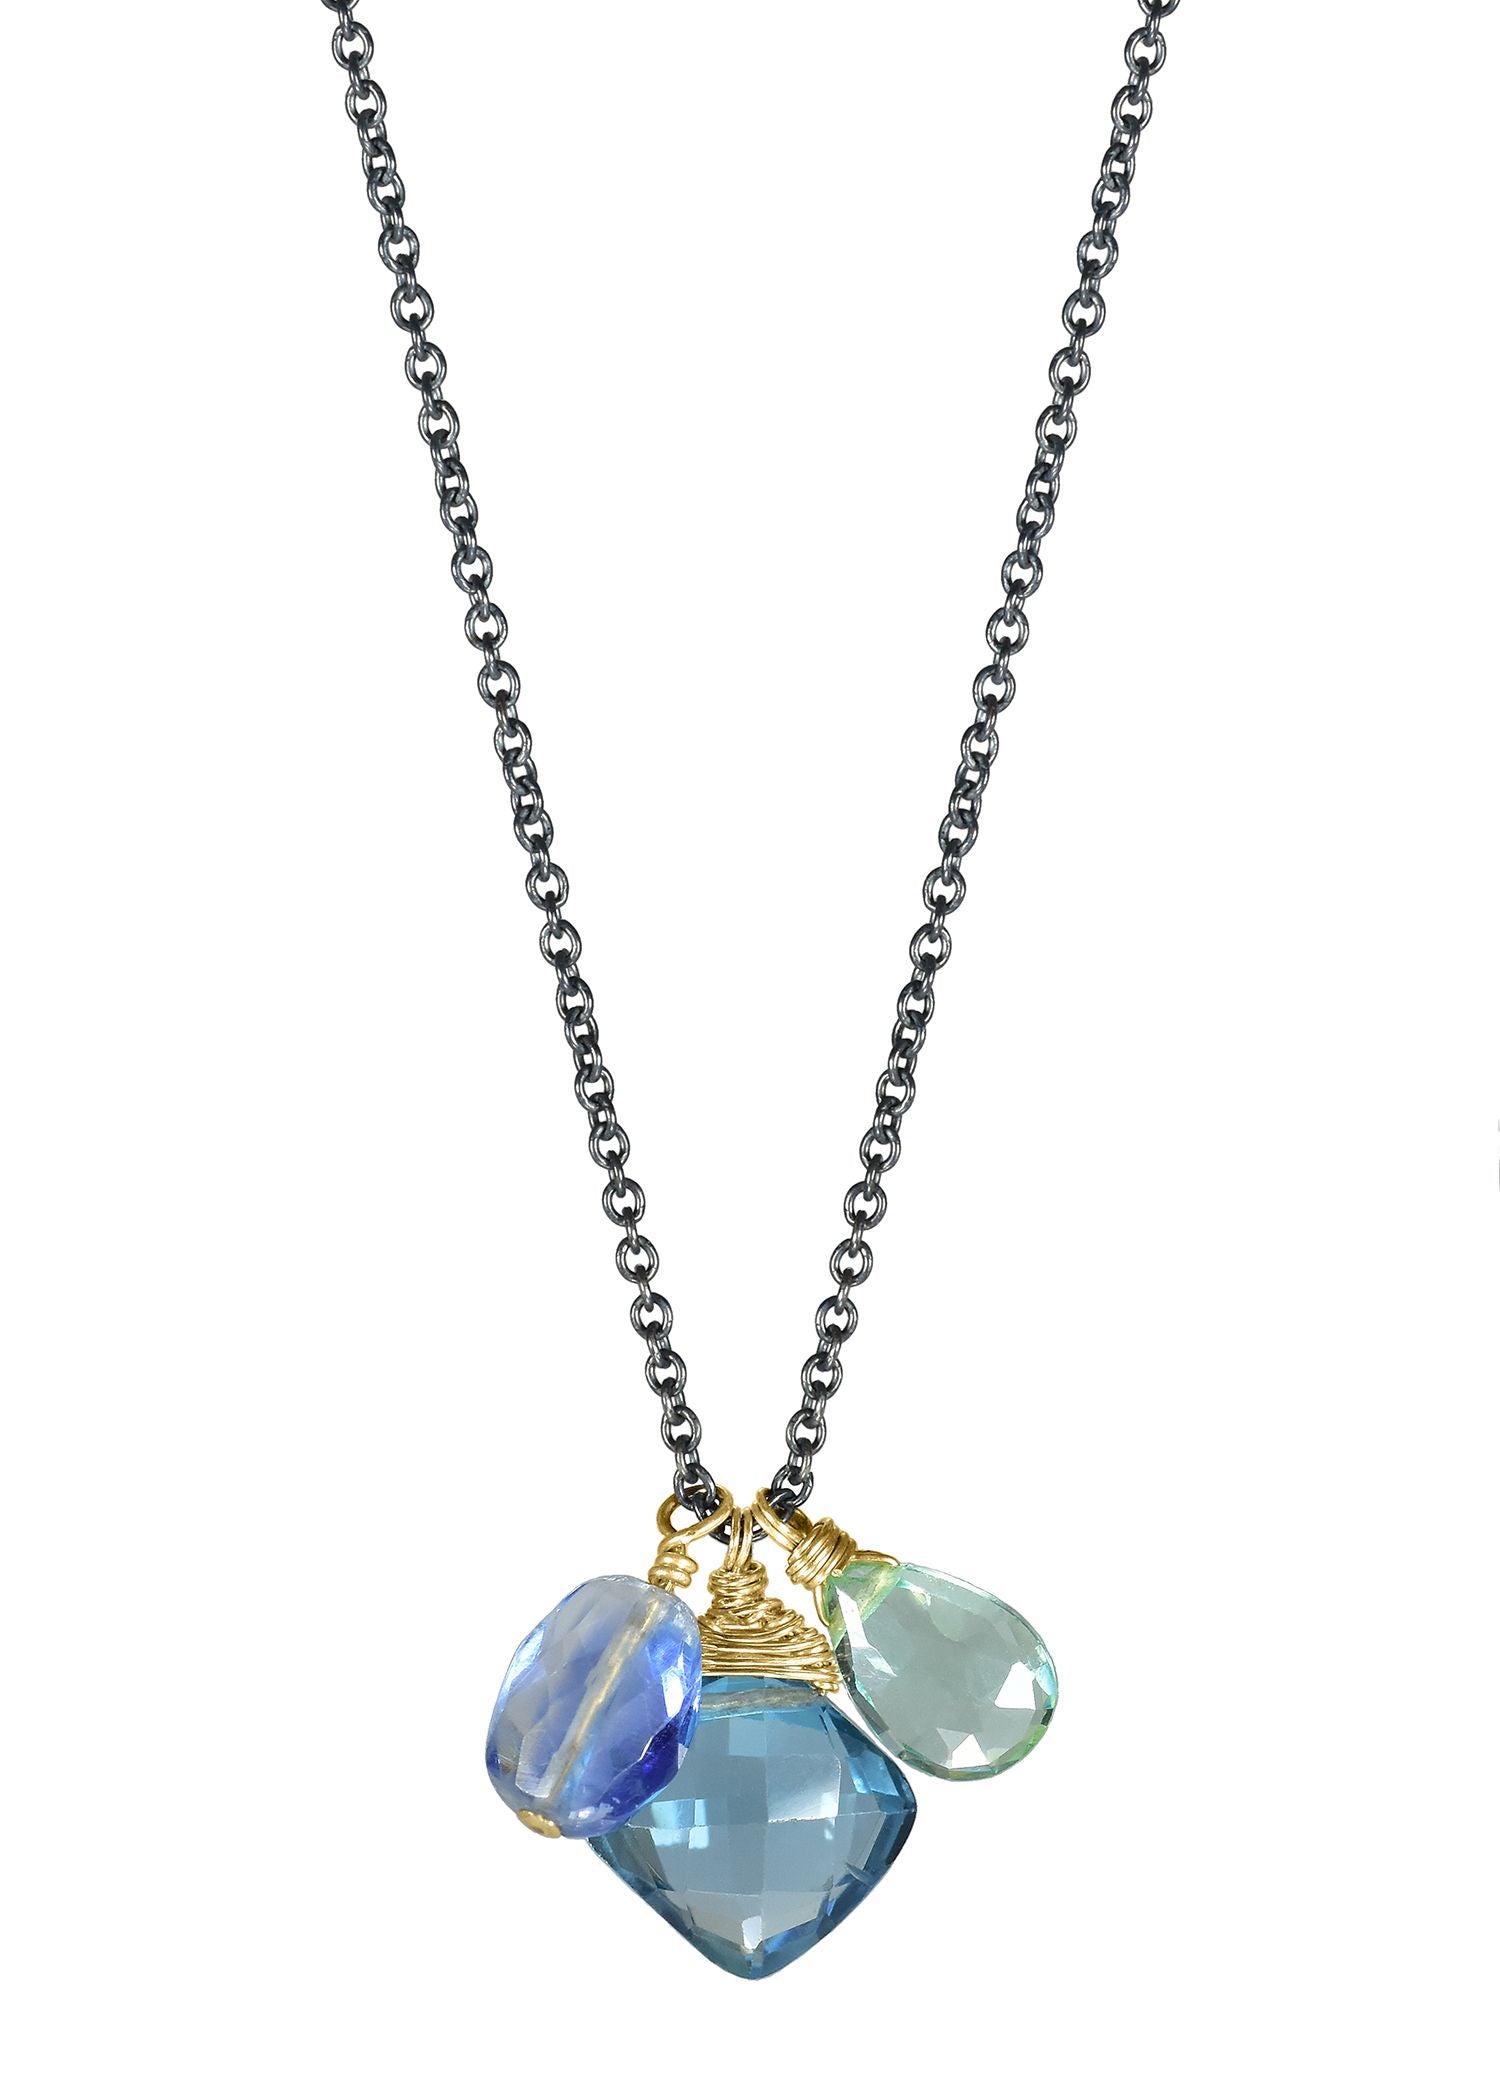 Kyanite London blue topaz Flourite 14k gold fill Sterling silver Mixed metal Necklace measures 17” in length Pendants measure 7/16” in length and 3/8” total in width Handmade in our Los Angeles studio